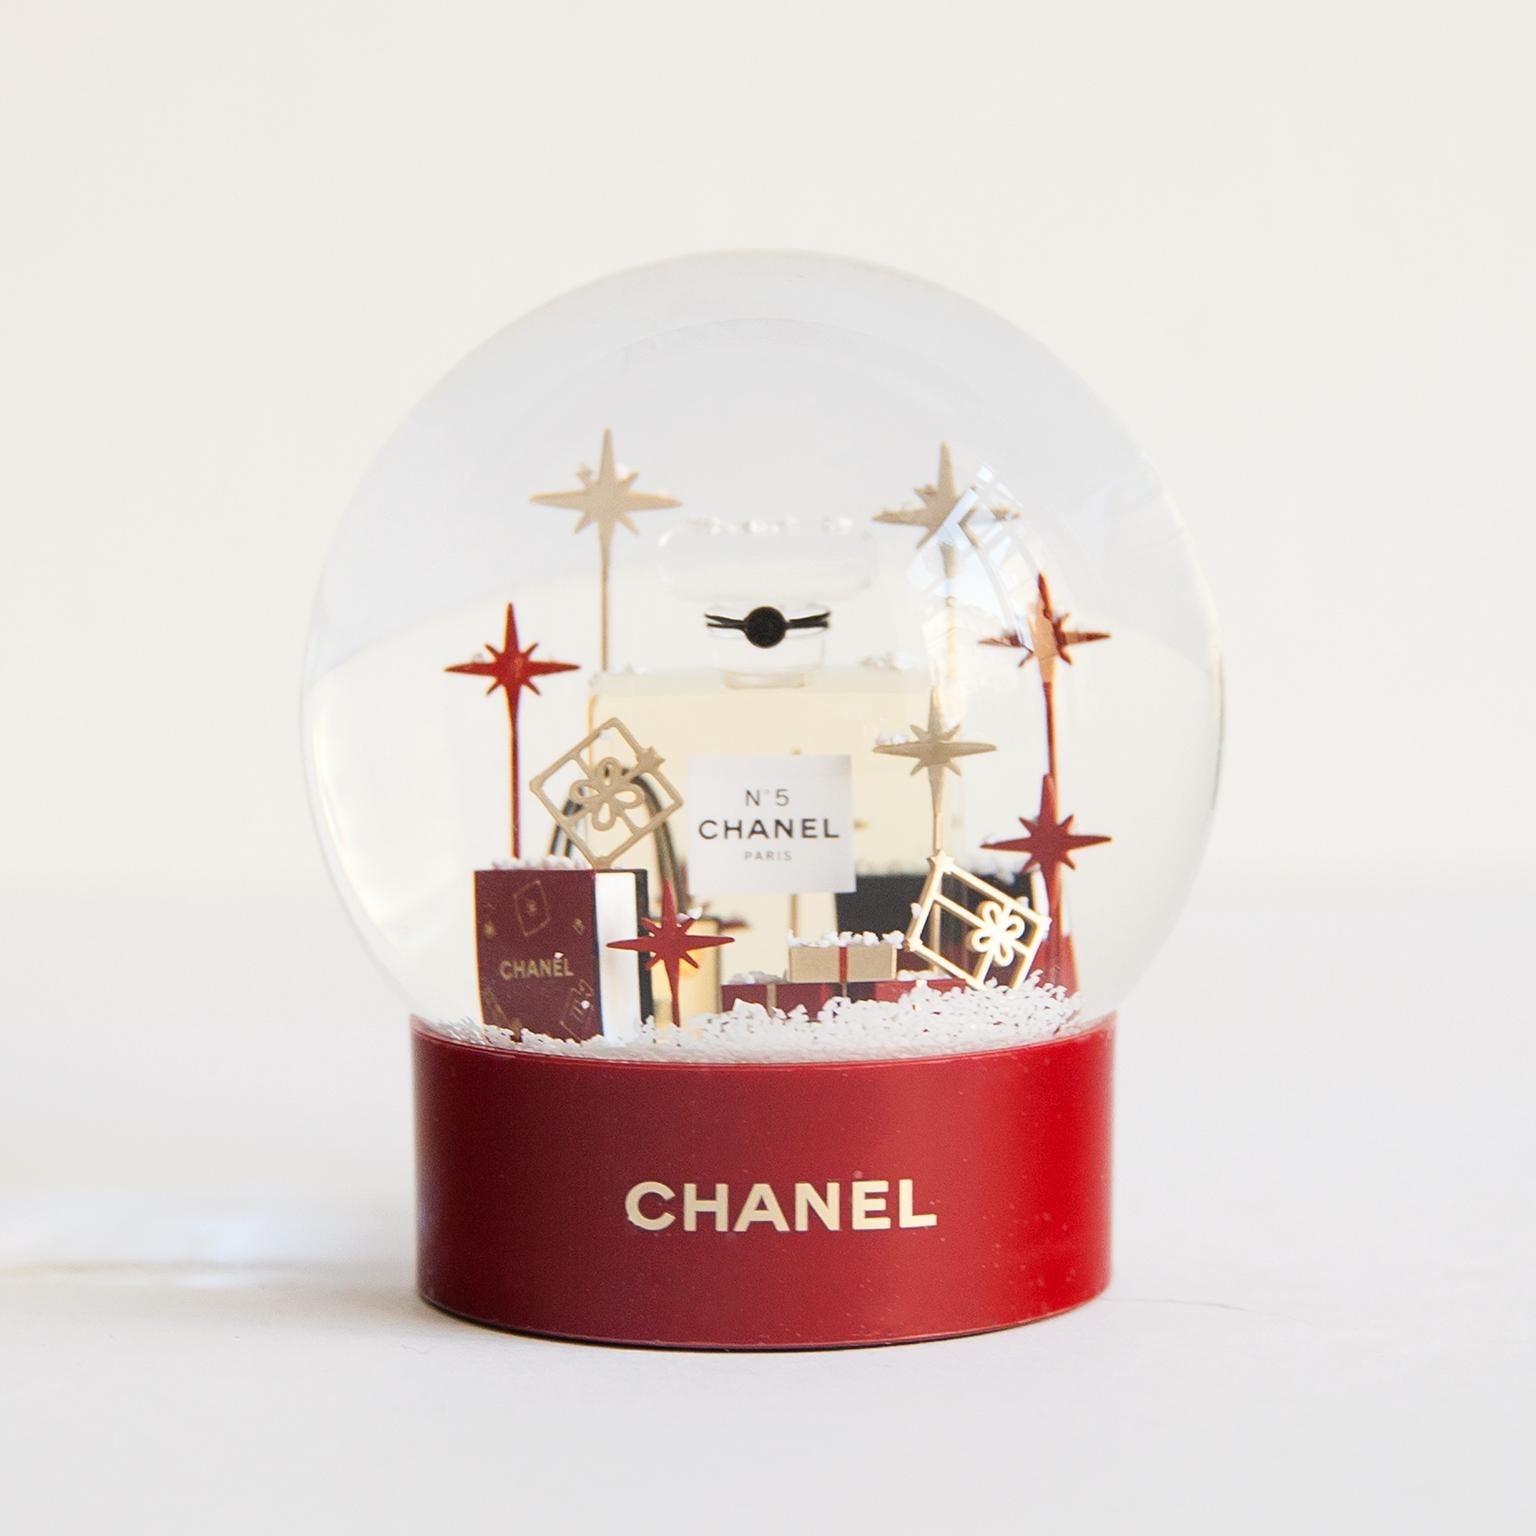 Rare limited edition of a Chanel Snow Ball with red bags on a white base, which are only for VIP Customers in excellent condition and with the original box.

